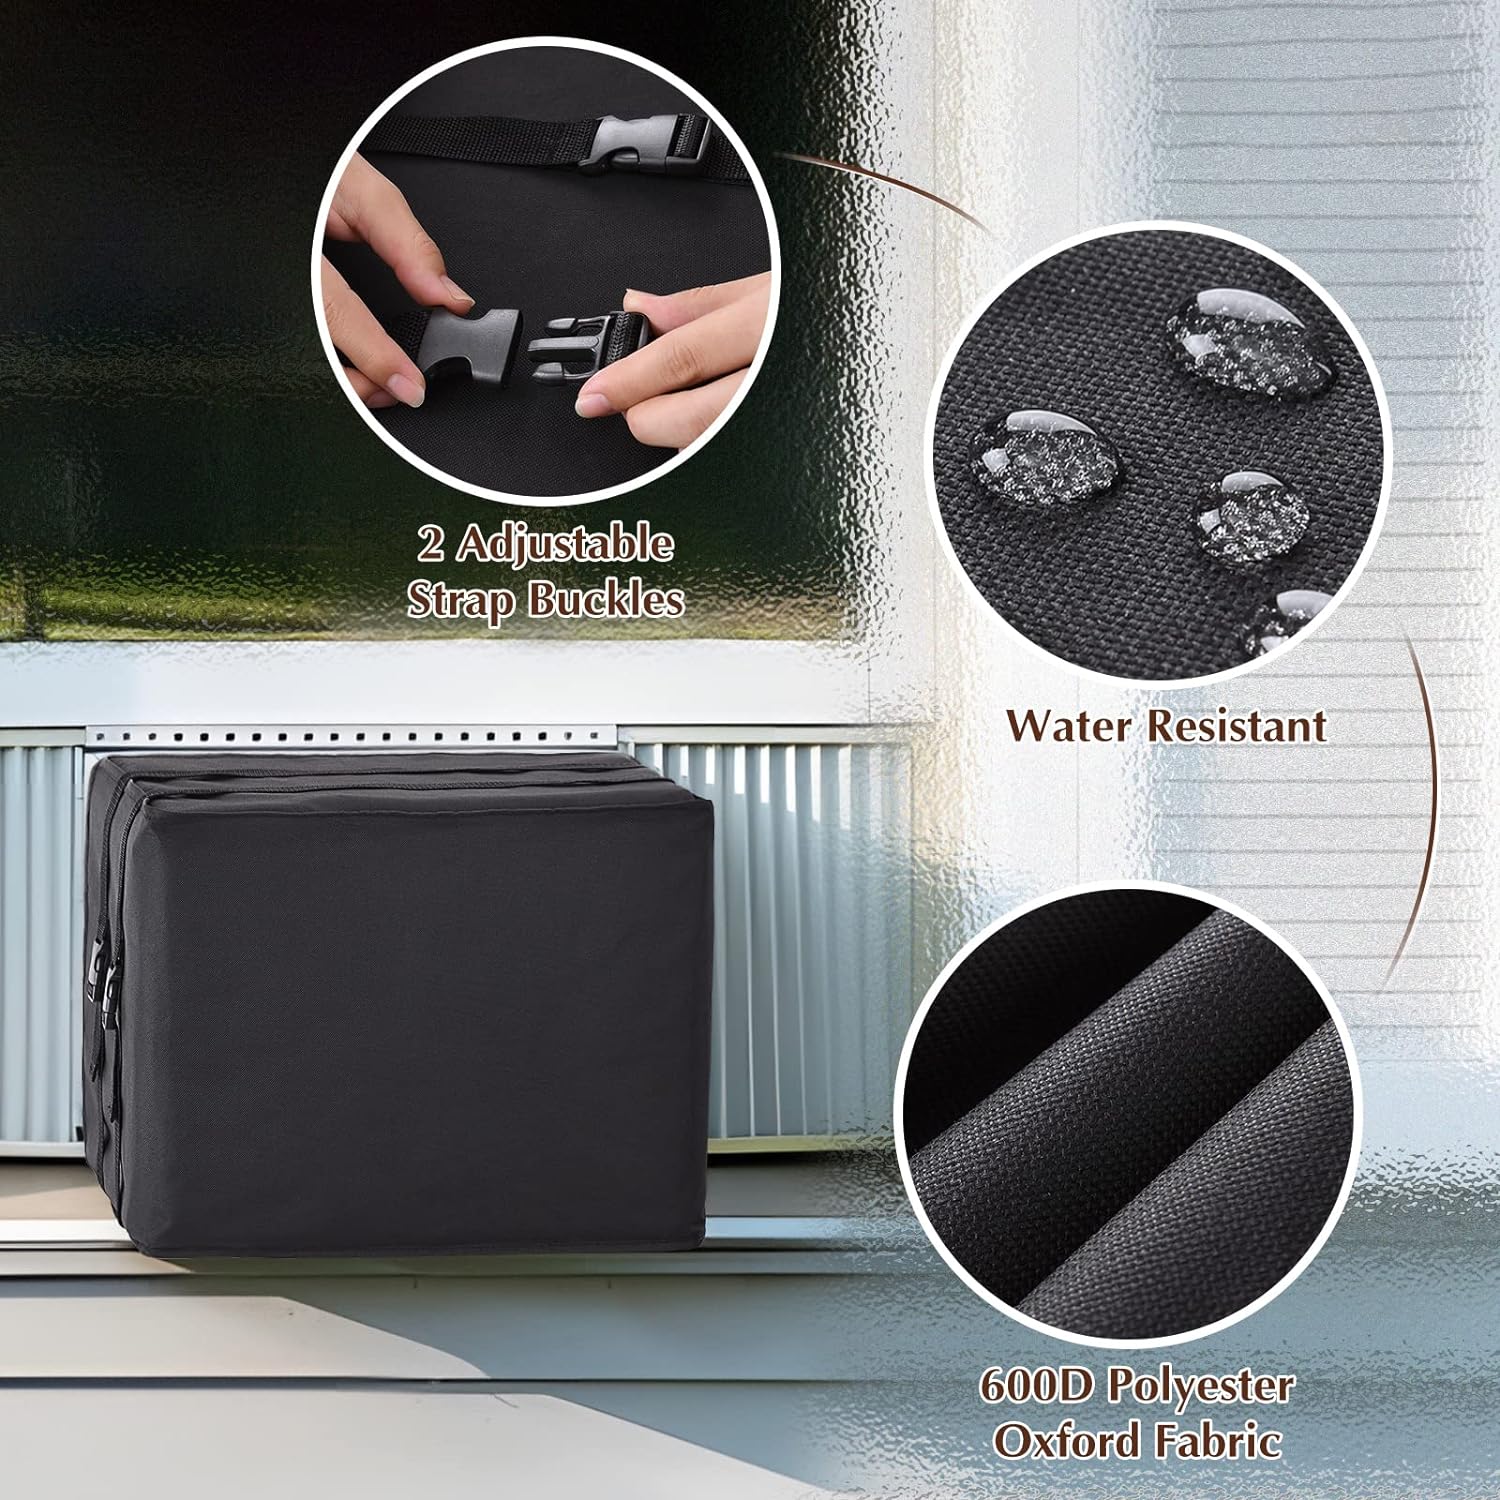 Bestalent Outdoor Window Air Conditioner Cover, AC Unit Cover for Outside 21.5W x 16D x 15H inches (Black)